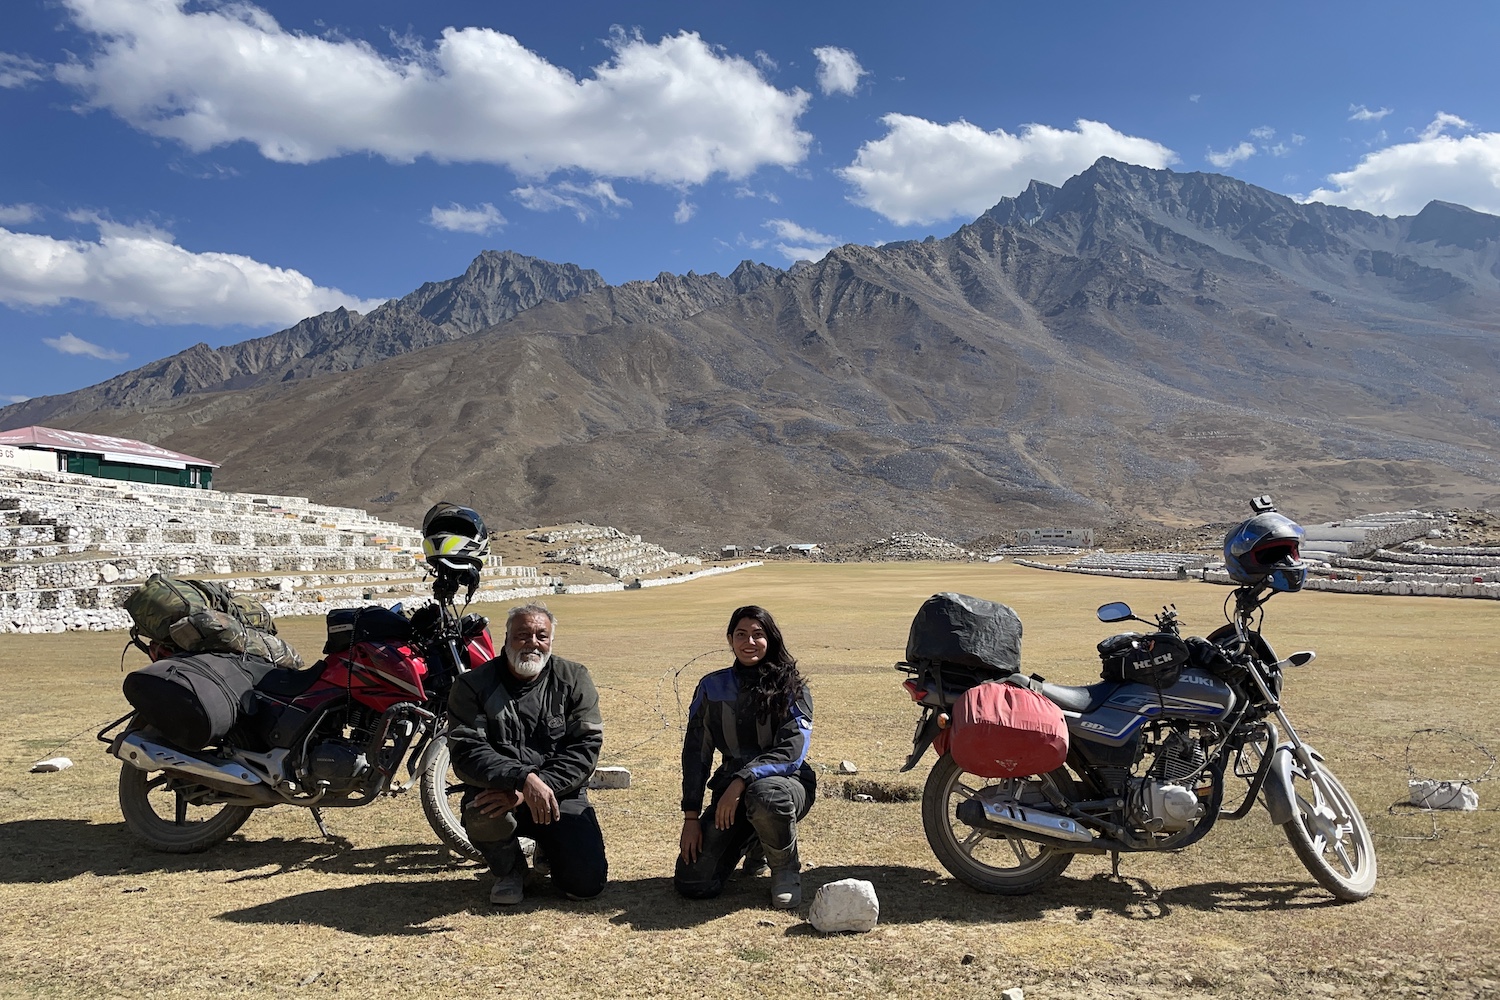 ghazal and Qazi Farooqi posing with their motorcycles in the high-altitude Katpana Desert